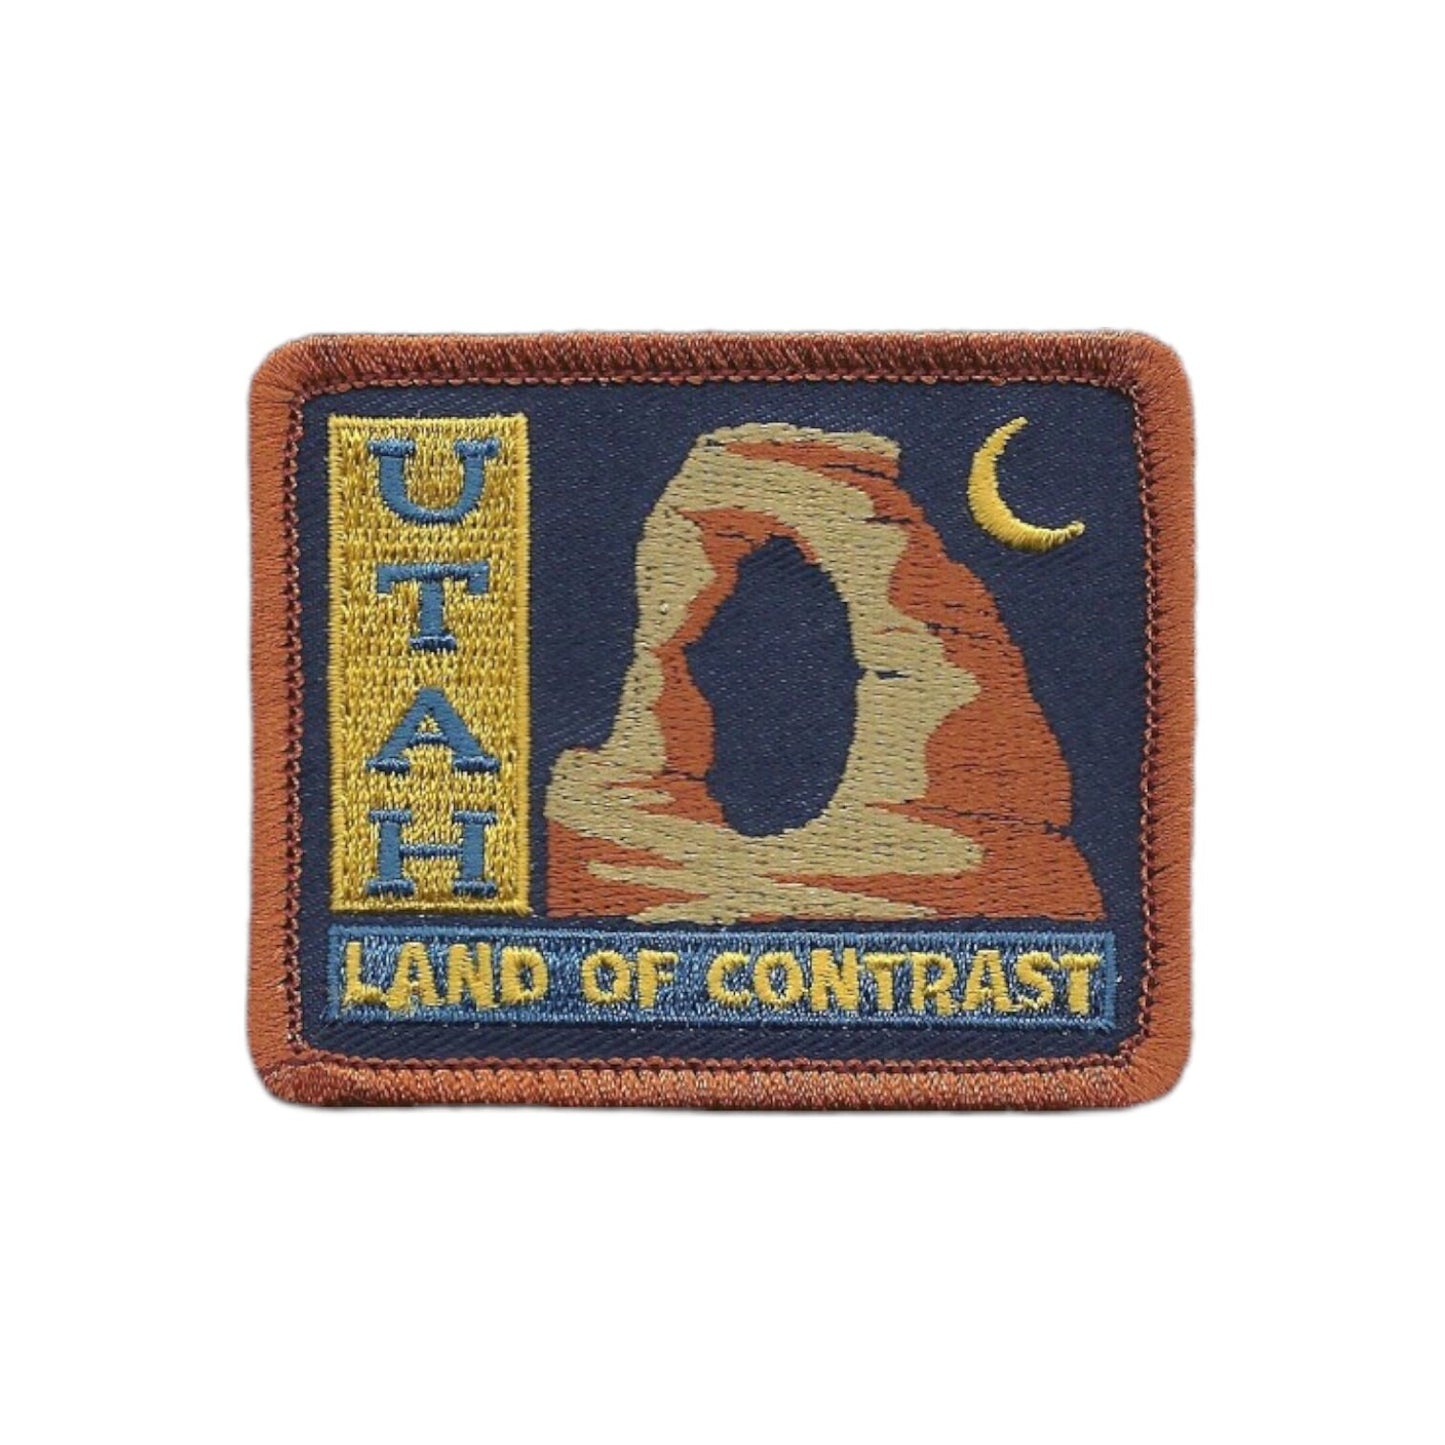 Utah Patch – Utah Land of Contrast – Travel Patch Iron On – UT Souvenir Patch Circle 2.5″ Travel Gift Arch Formation Night Sky